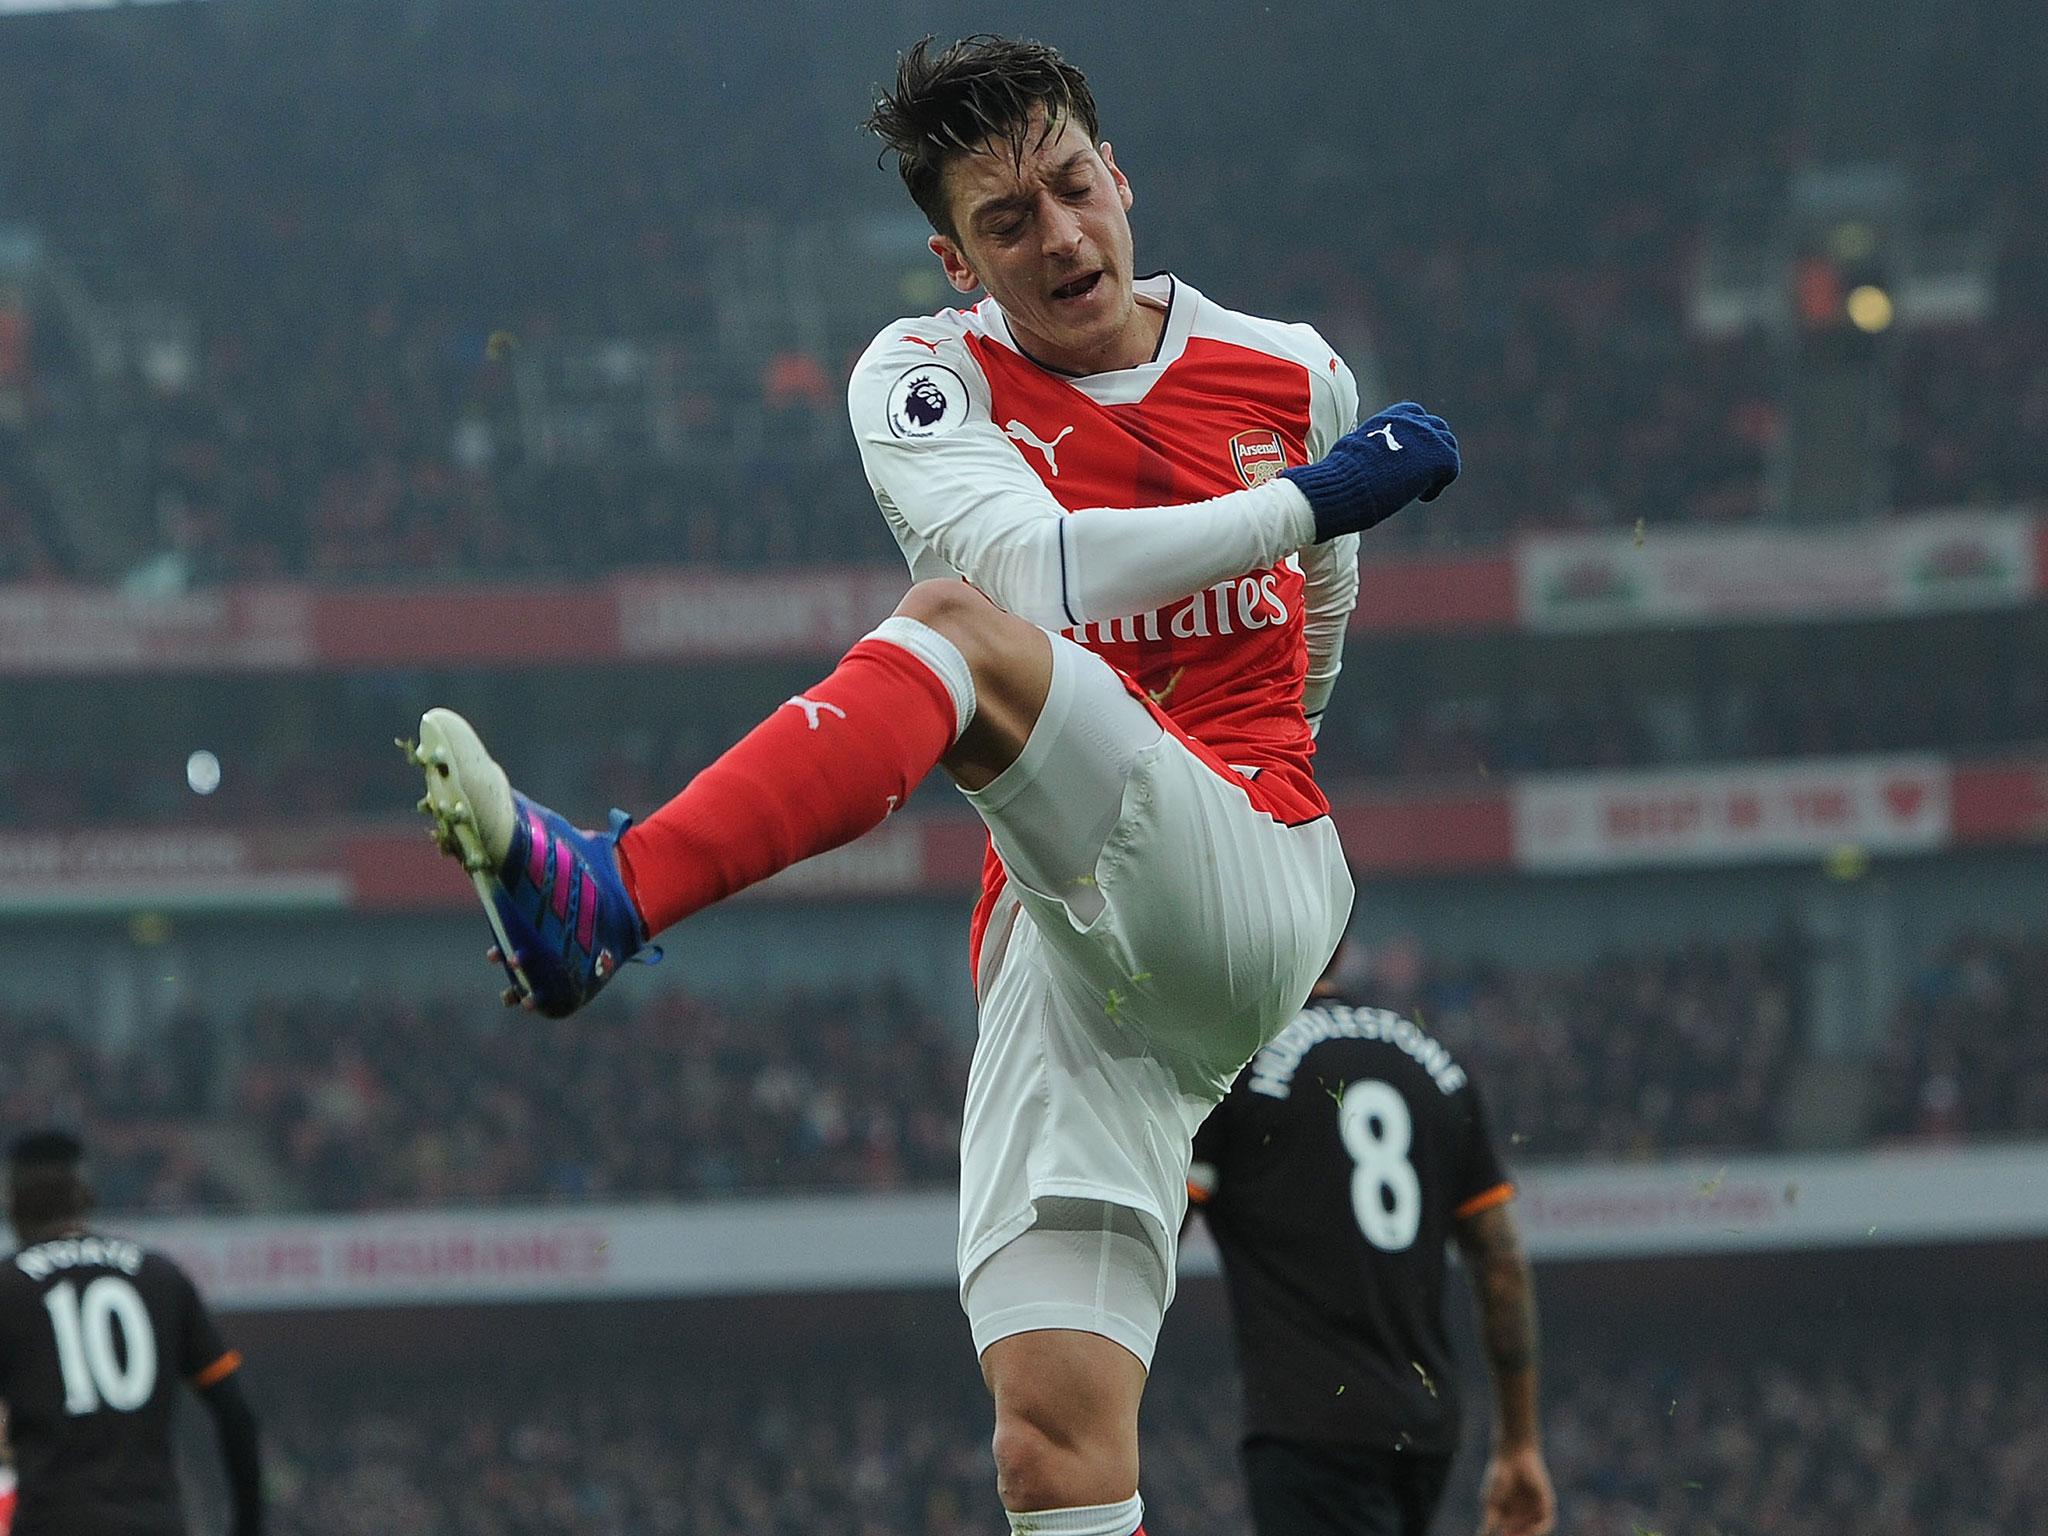 Arsene Wenger must weigh up dropping Mesut Özil for Arsenal's Champions League tie against Bayern Munich